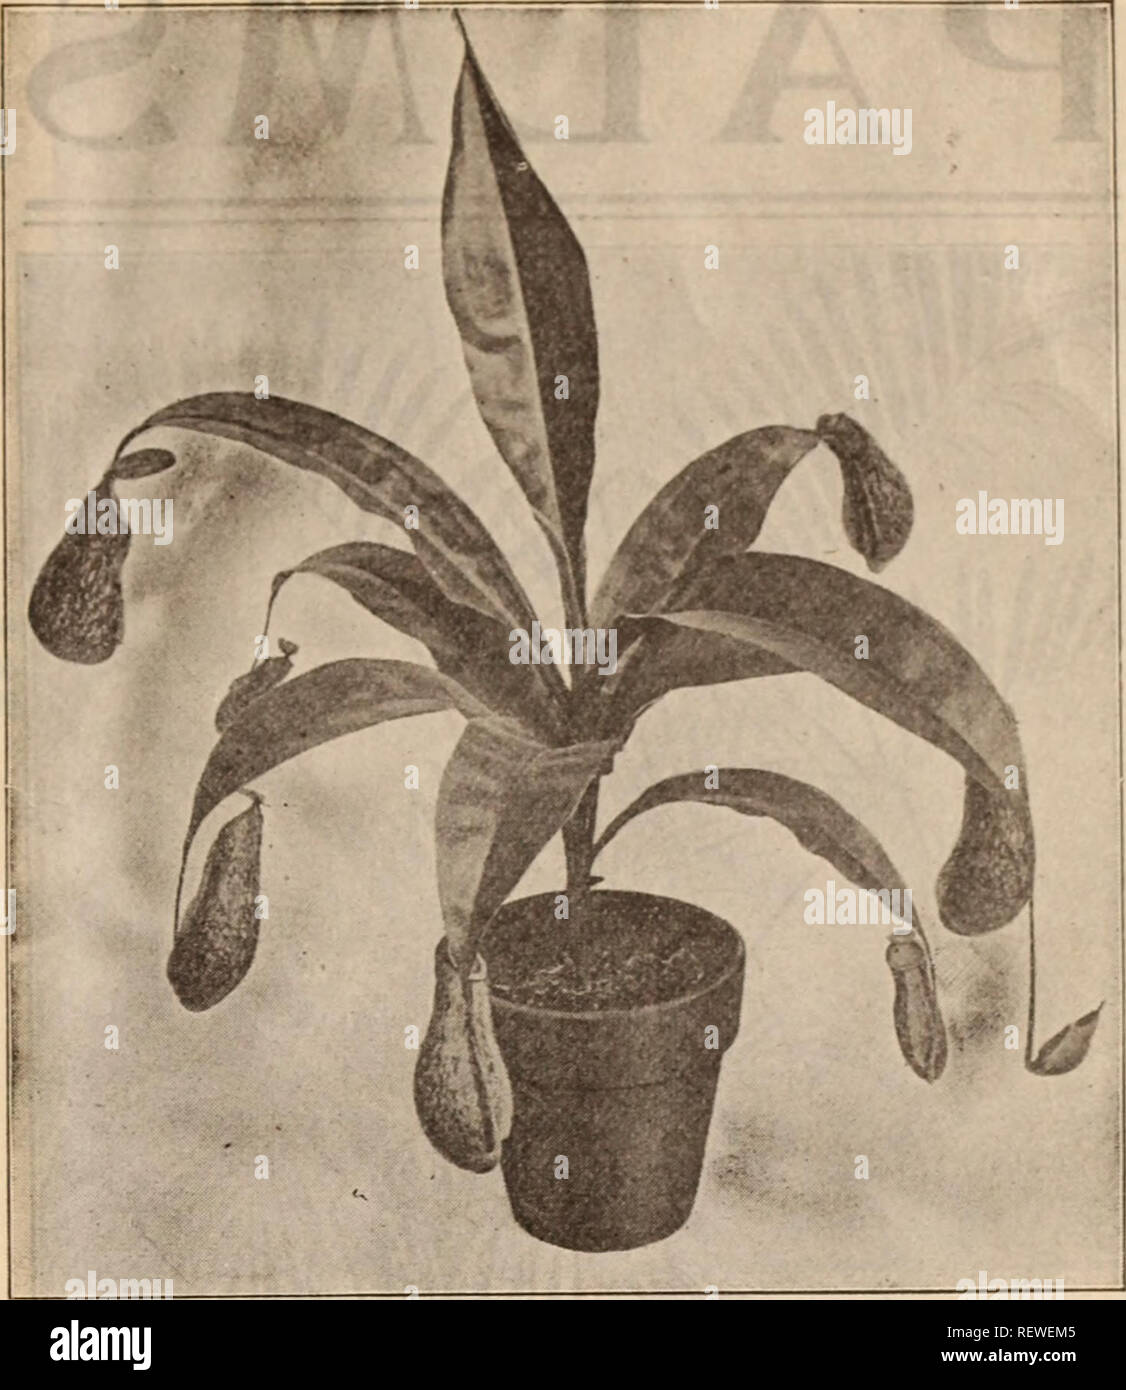 . Dreer's wholesale price list / Henry A. Dreer.. Nursery Catalogue. MARANTA VITTATA NEPENTHES (Pitcher Plant) Gracilis. 2'/&lt;i-inch pots, Isolepis. cts. per doz.; $4.00 per 100. Lagerstroemia Crape Myrtle). Indica. Delicate soft-pink. Alba. Pure white. Strong plants, 5 and 6 inch pots, 35 cts. each. Pandanus Pacificus. A beautiful species with broad, massive dark green foliage. Each 4-inch pots ^50 R &quot; =' 1 00 Lapageria. Rosea. 5-inch pots, $1.50 each. | Alba. 5-inch pots, $2.00 each. Marantas, Six Choice Varieties. Jnsignes Makoyana 'Rosea Lineata Each . 35 50 Each Sanderi 75 Van den  Stock Photo